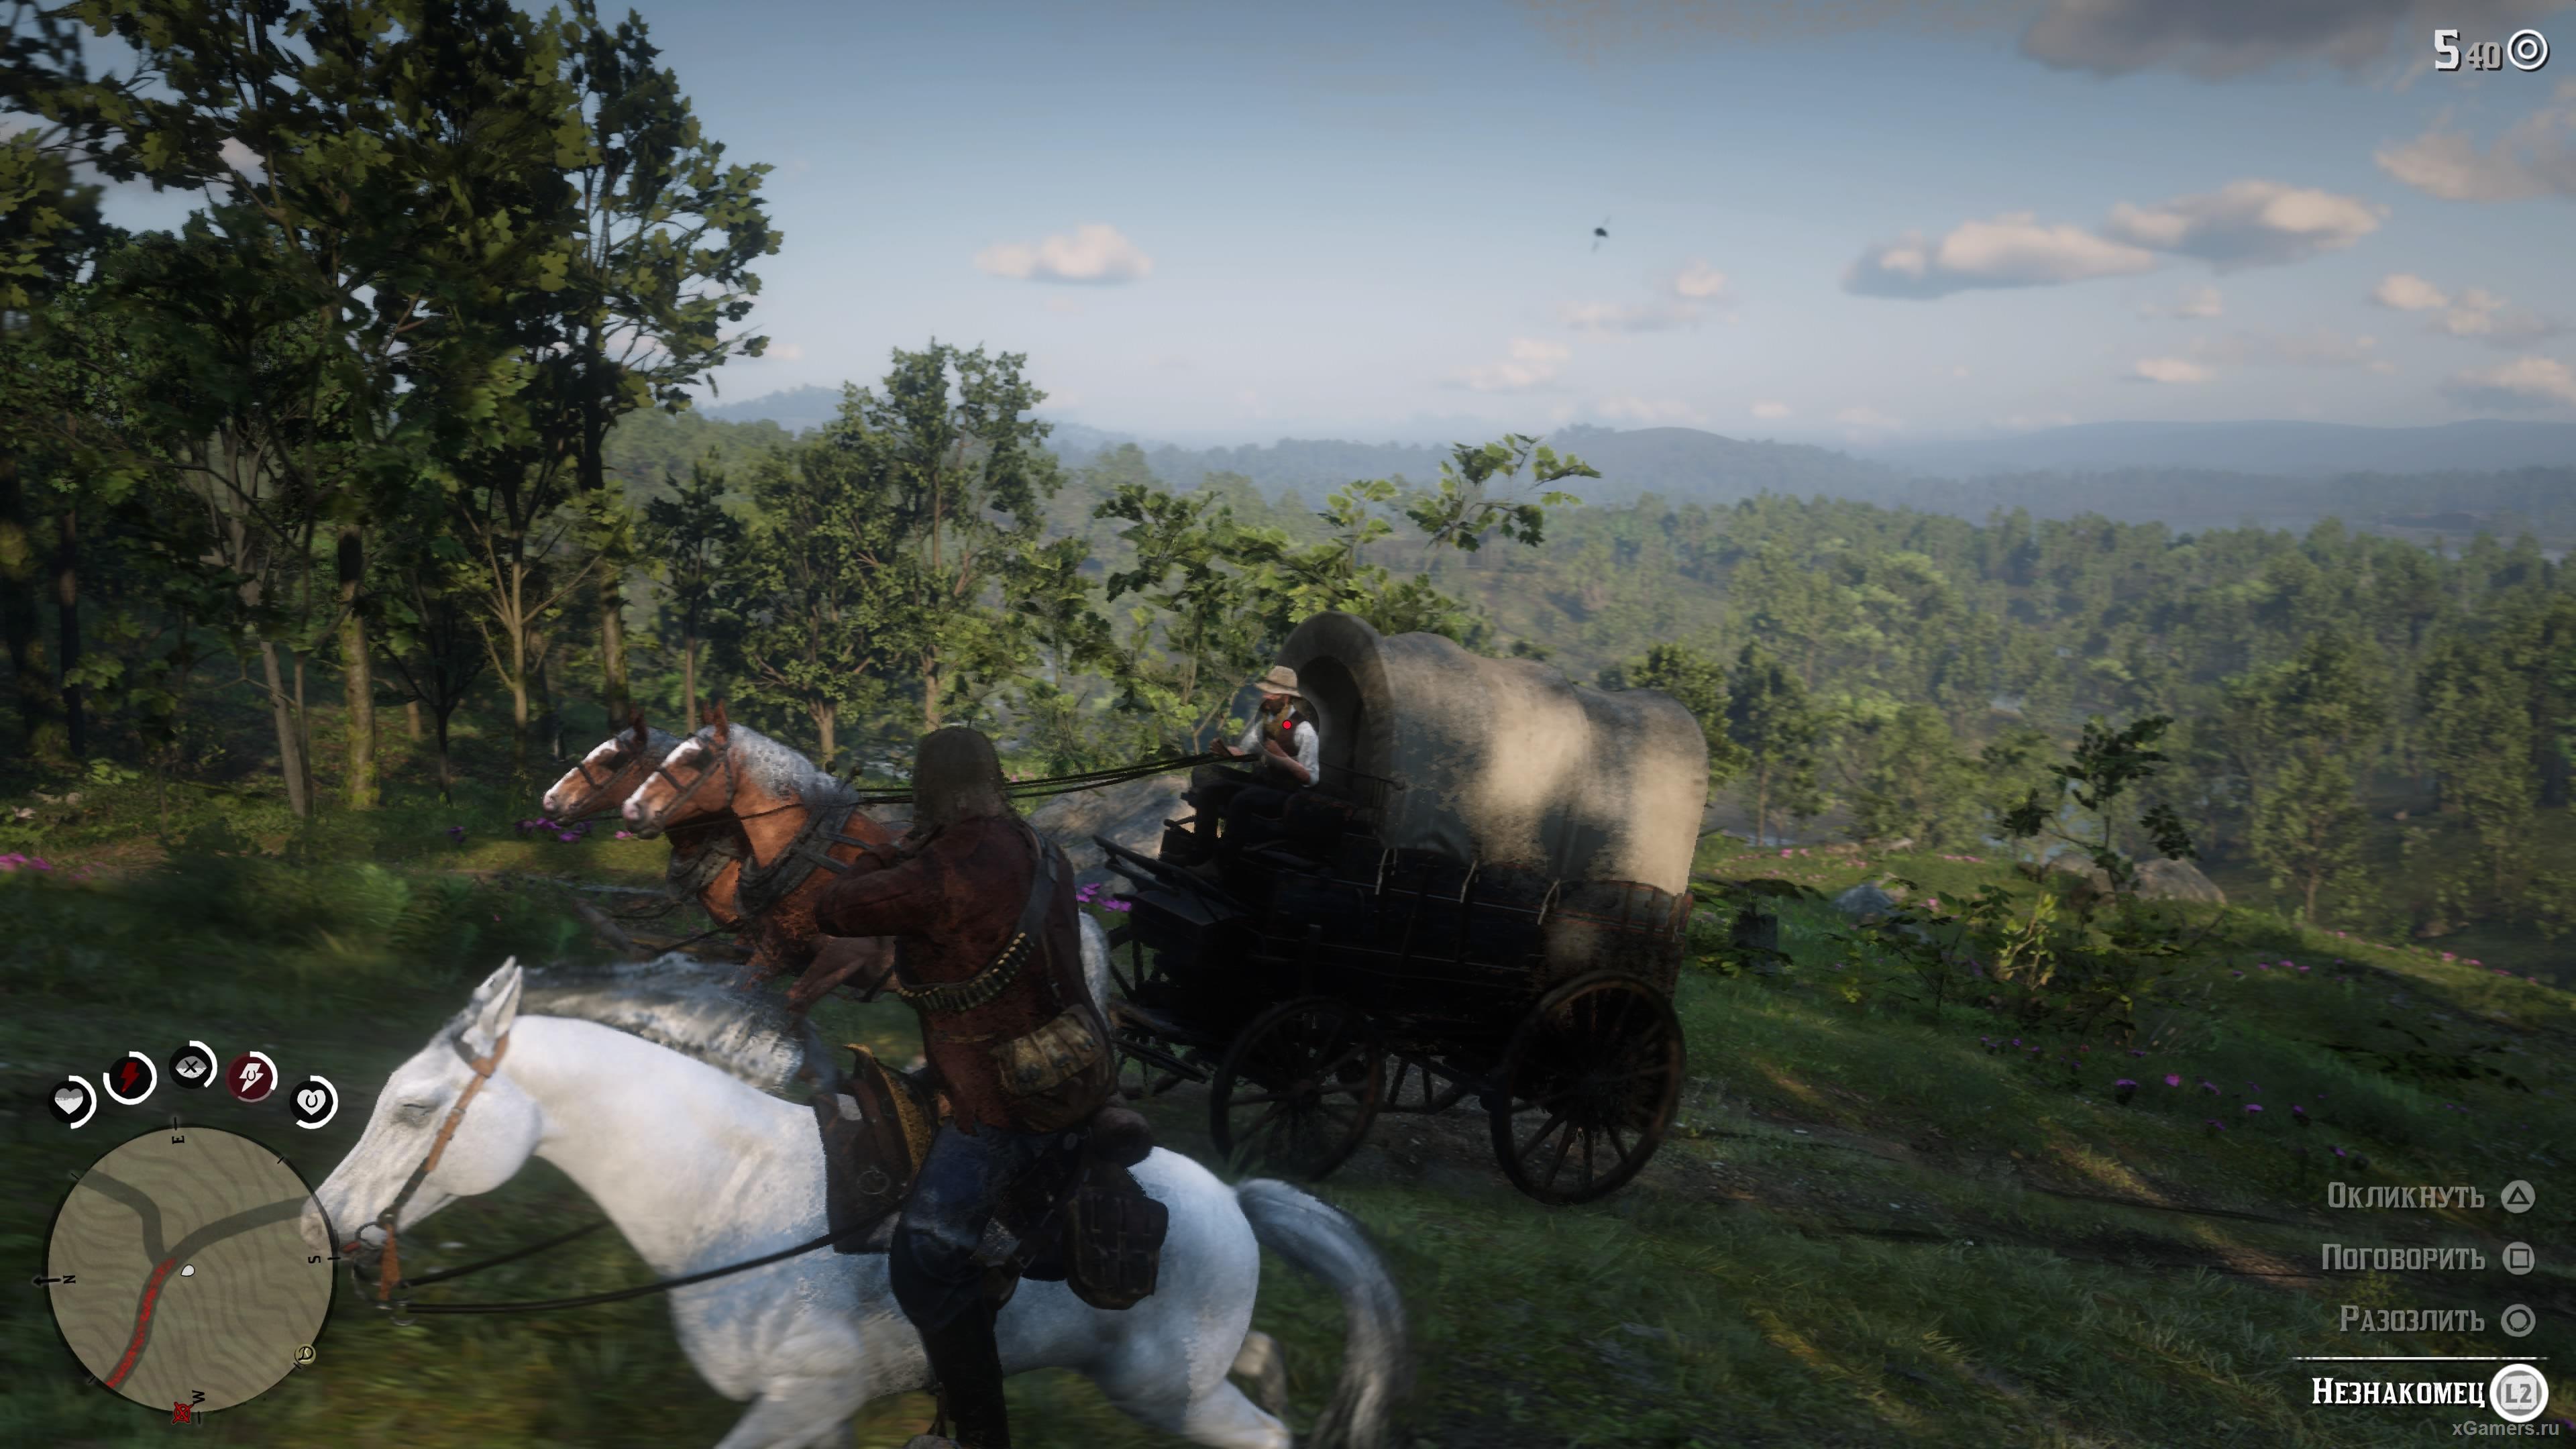 What is transported by stagecoach in the game RDR 2